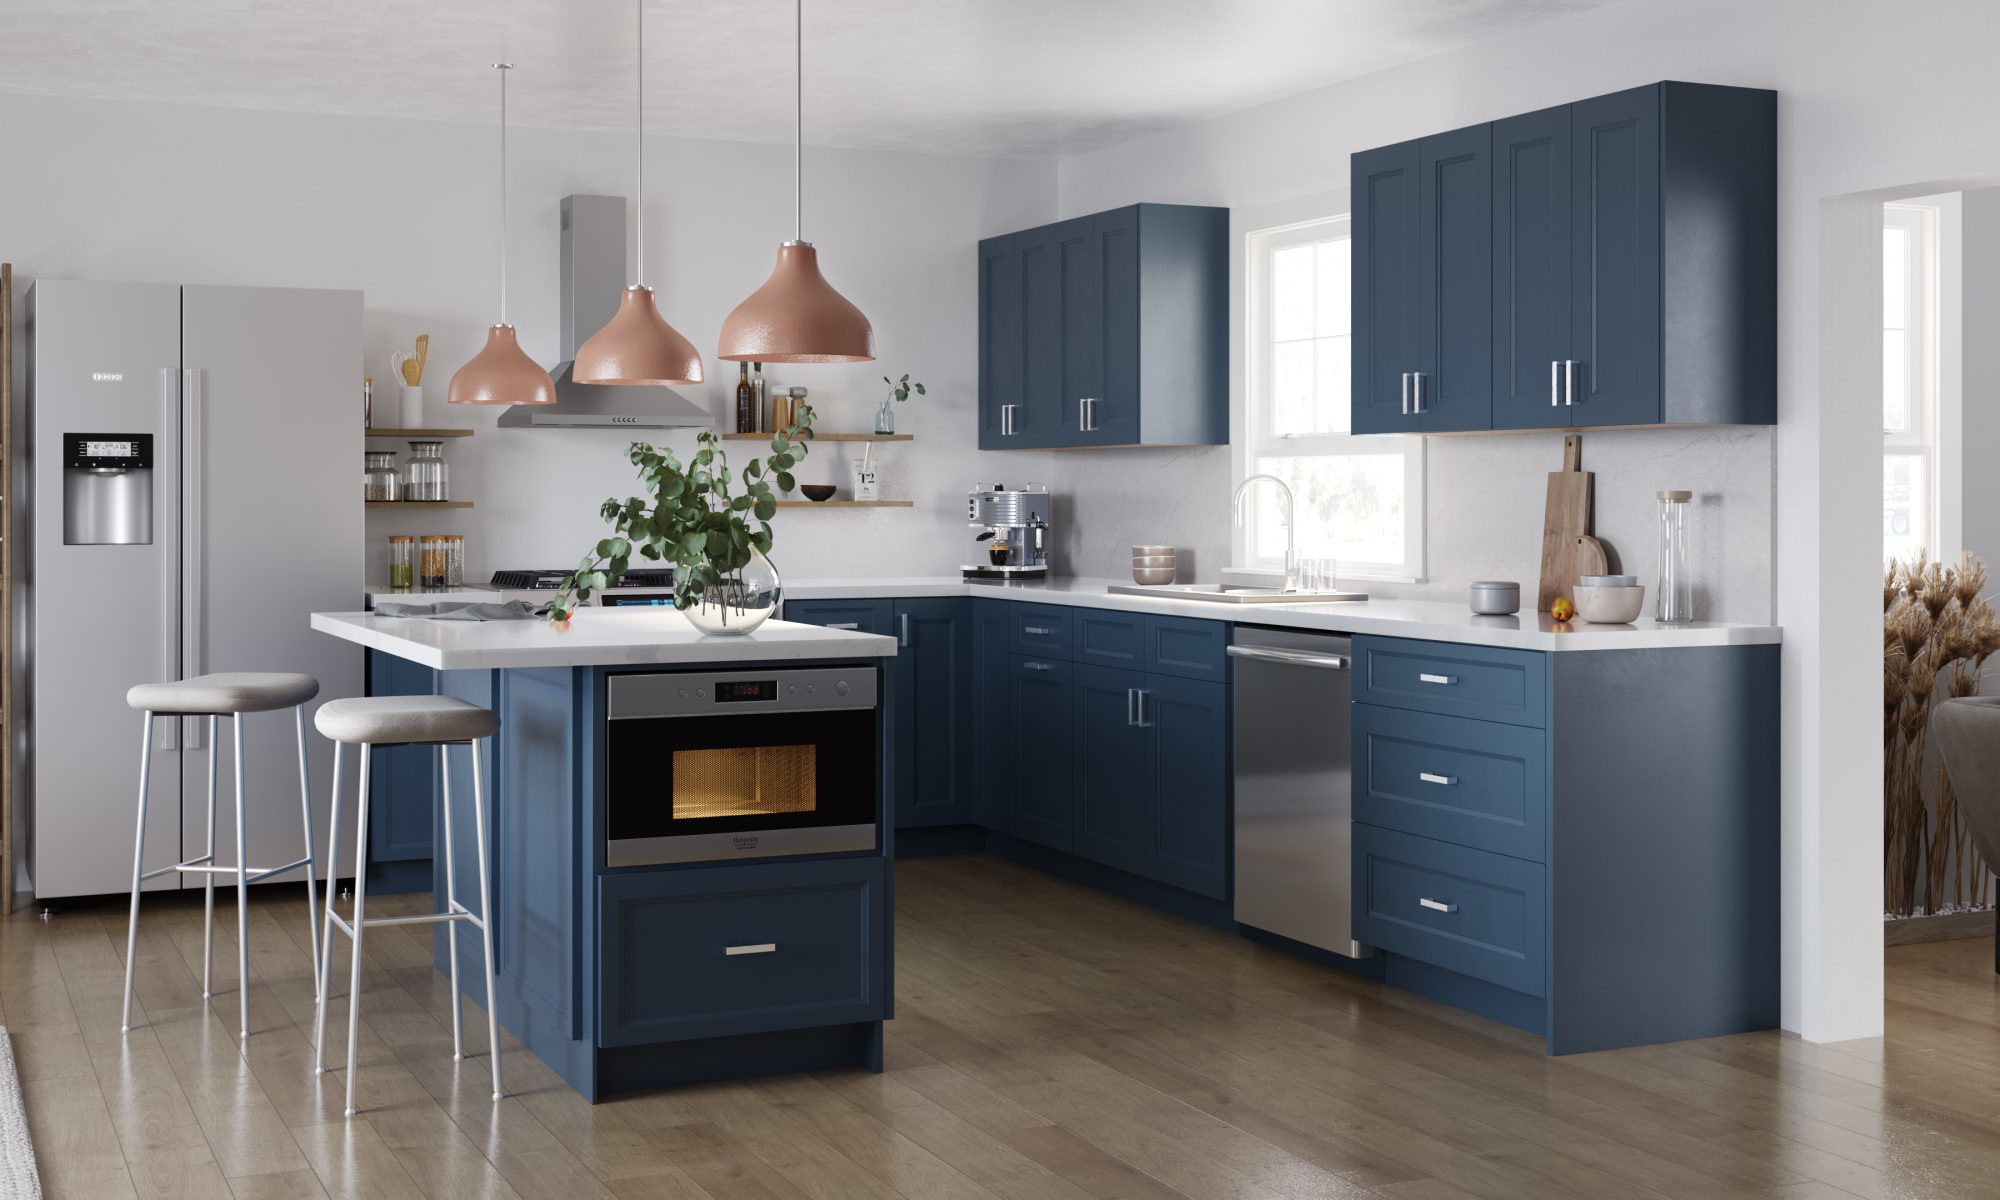 Todays Designer Kitchens Small-midnight-blue-kitchen-2000x1200 Why Dark Kitchen Cabinets May Be a Great Choice for Your Kitchen 